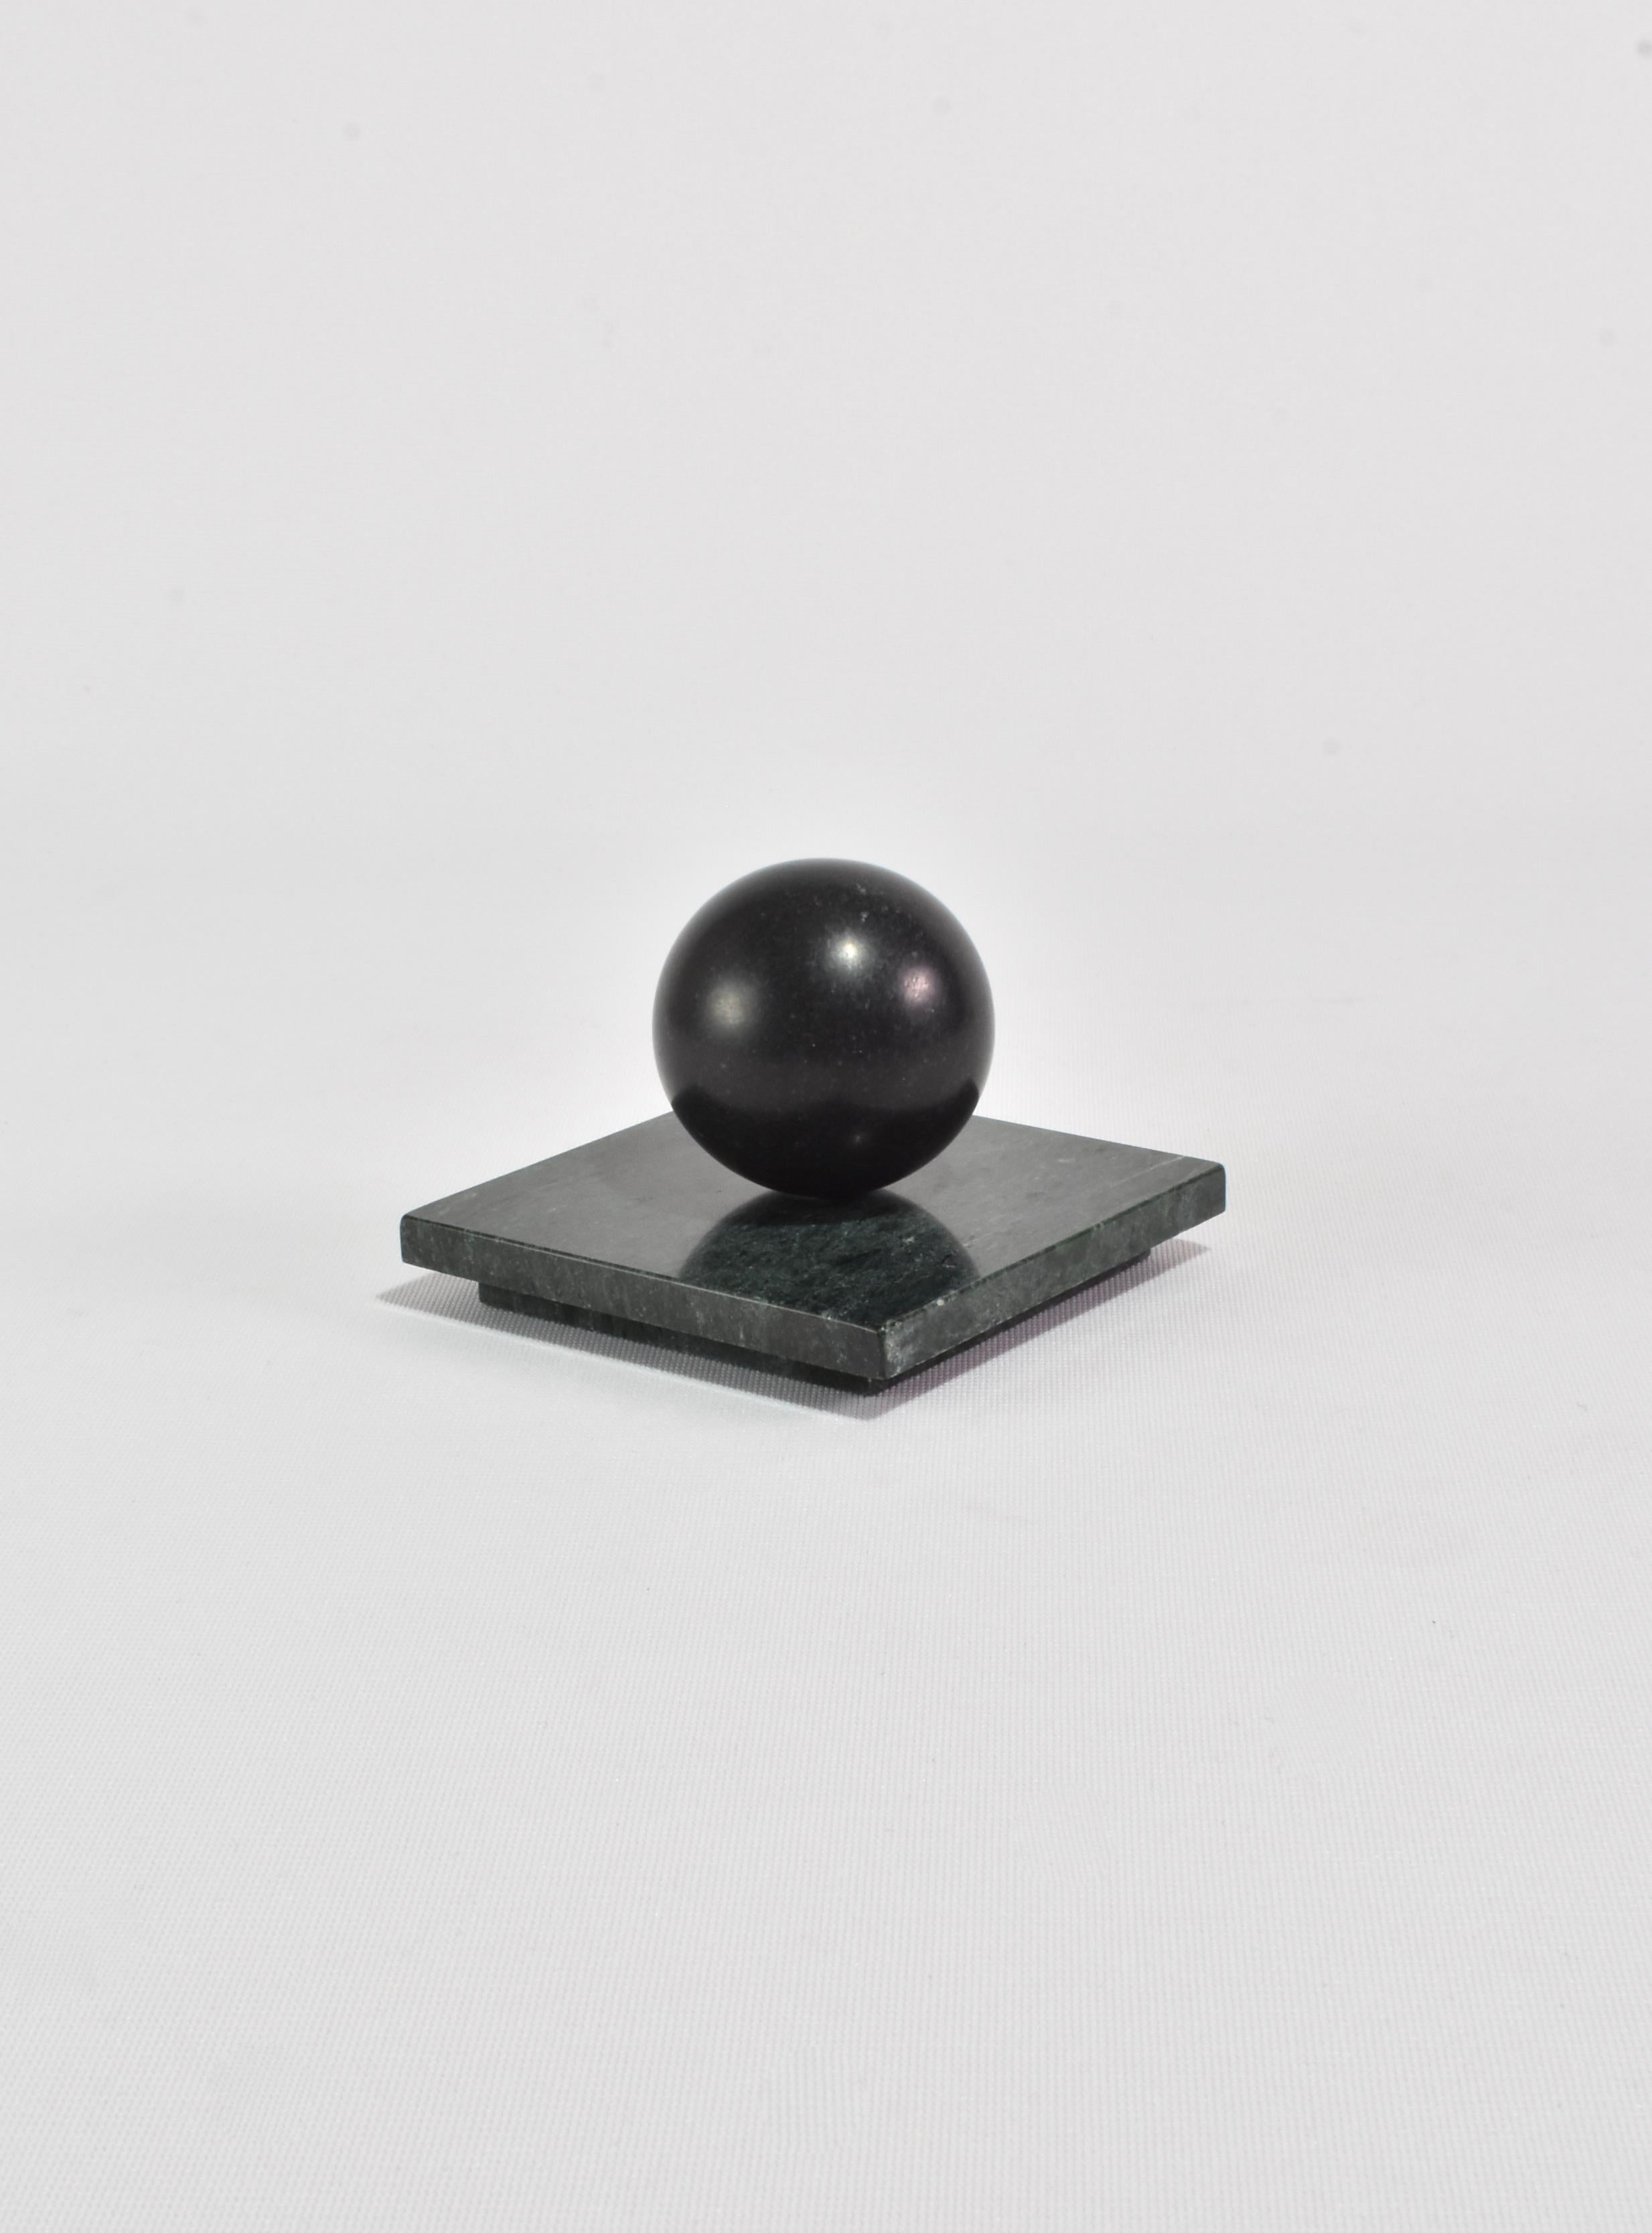 Tall Curio Box by Casa Shop in Green Marble with Black Onyx. Inspired by a favorite vintage find, each box features a polished rectangular base with a sphere handle. Handmade by artisans in India.

Use it to hide away an array of cherished items – a